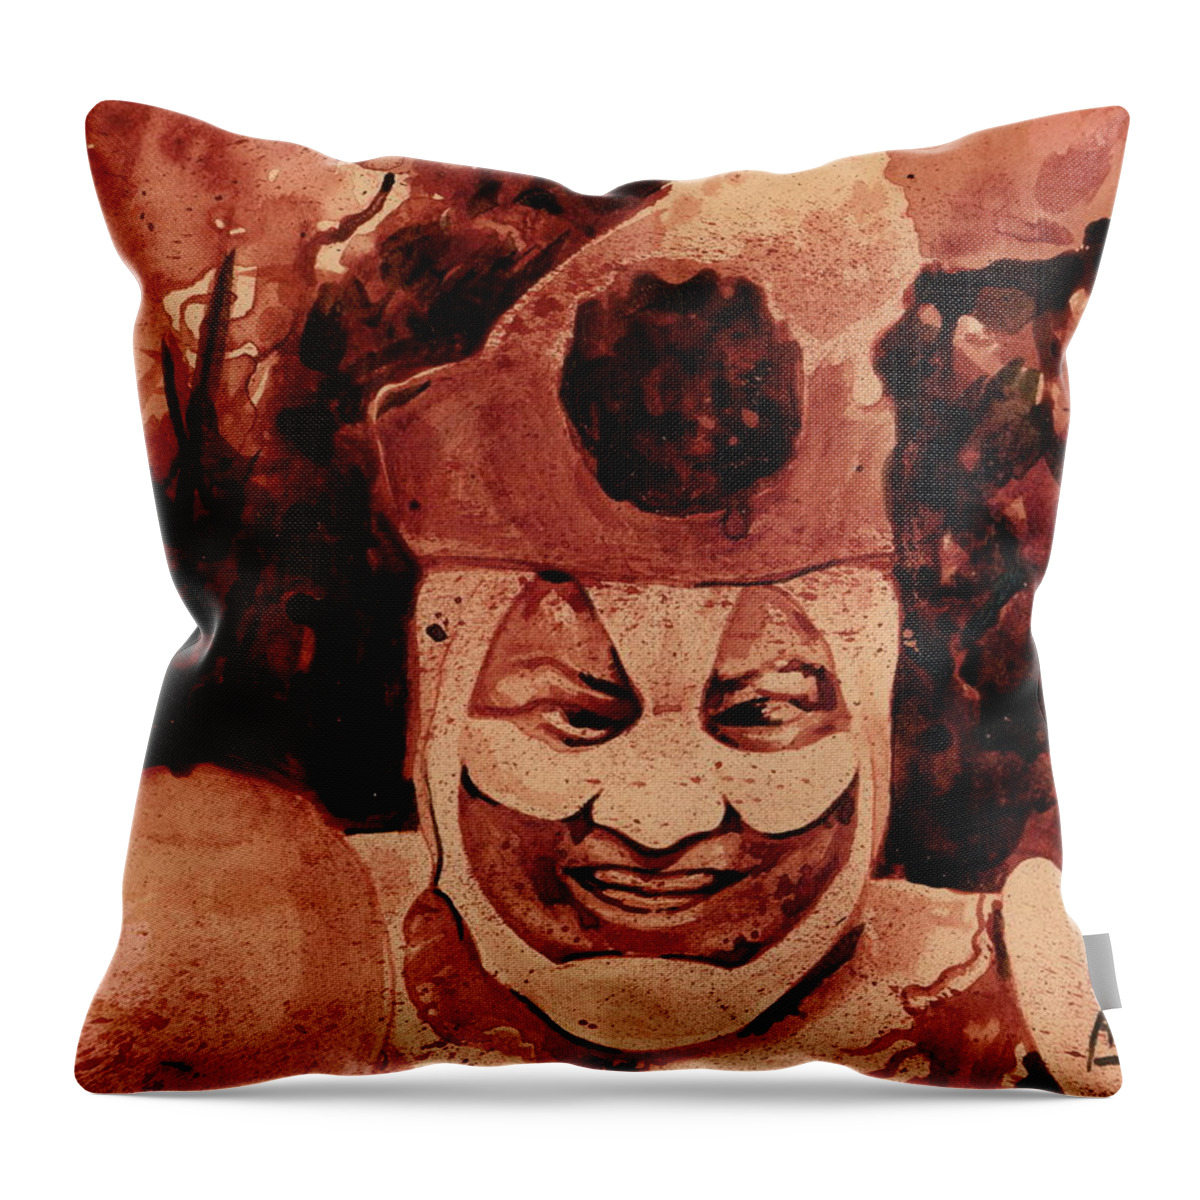 John Wayne Gacy Throw Pillow featuring the painting Pogo Painted In Human Blood by Ryan Almighty